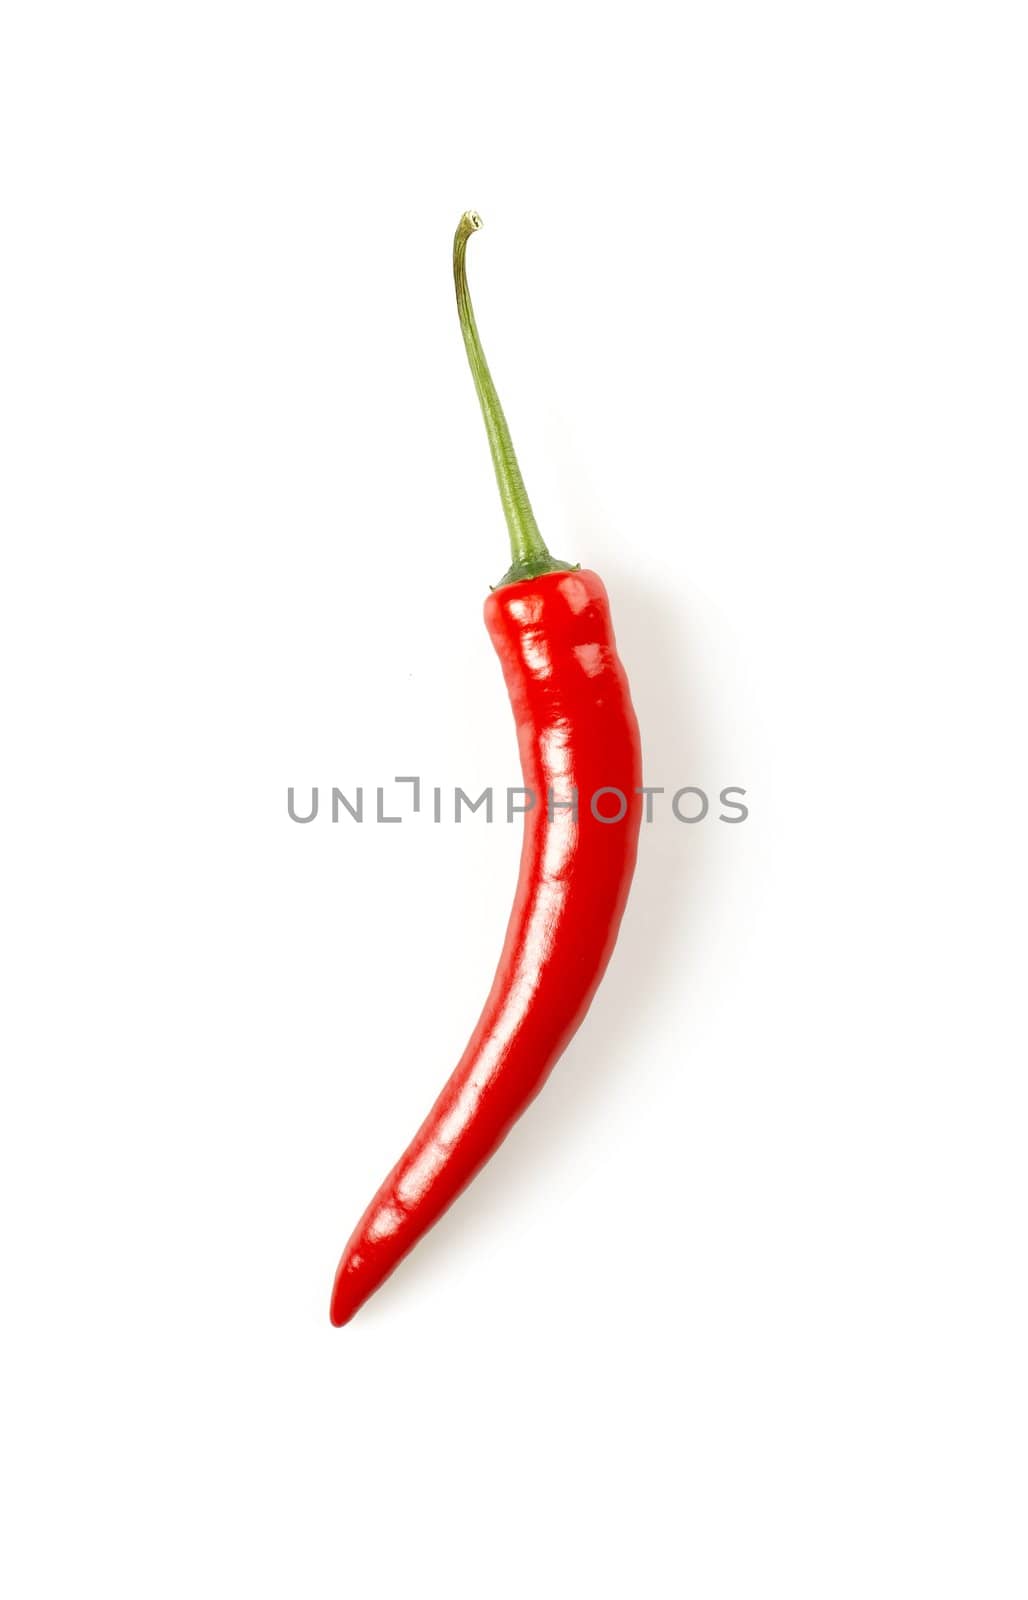 Isolated shot of red hot chilli pepper on white background